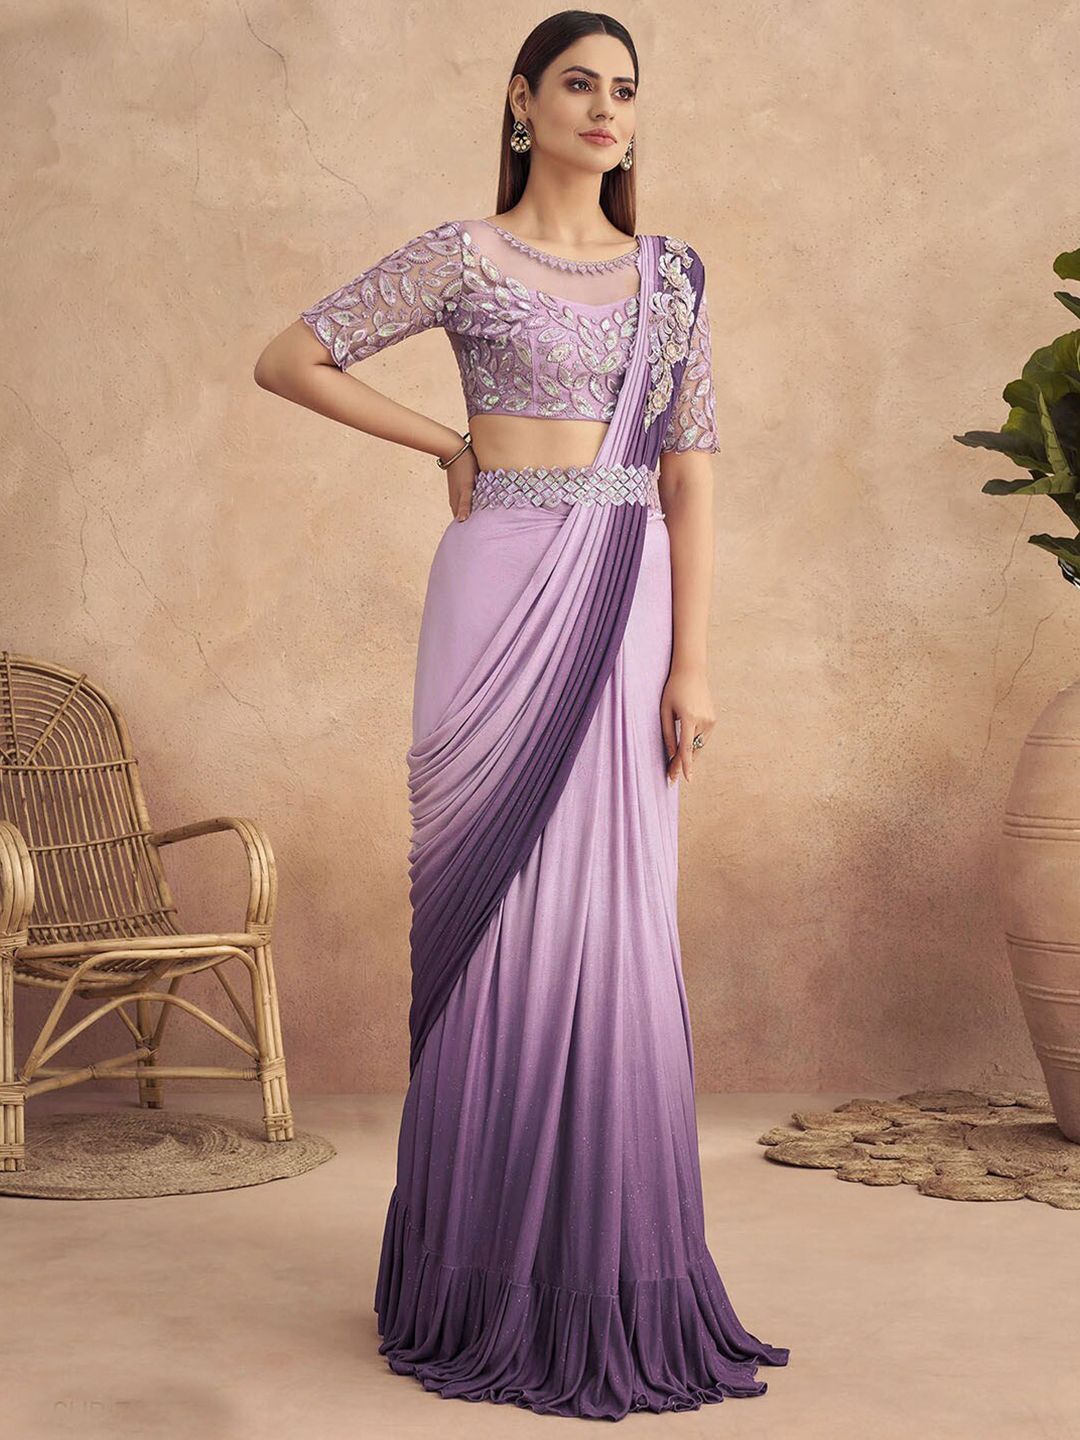 Satrani Pink & Purple Ombre Embroidered Ready to Wear Saree Price in India